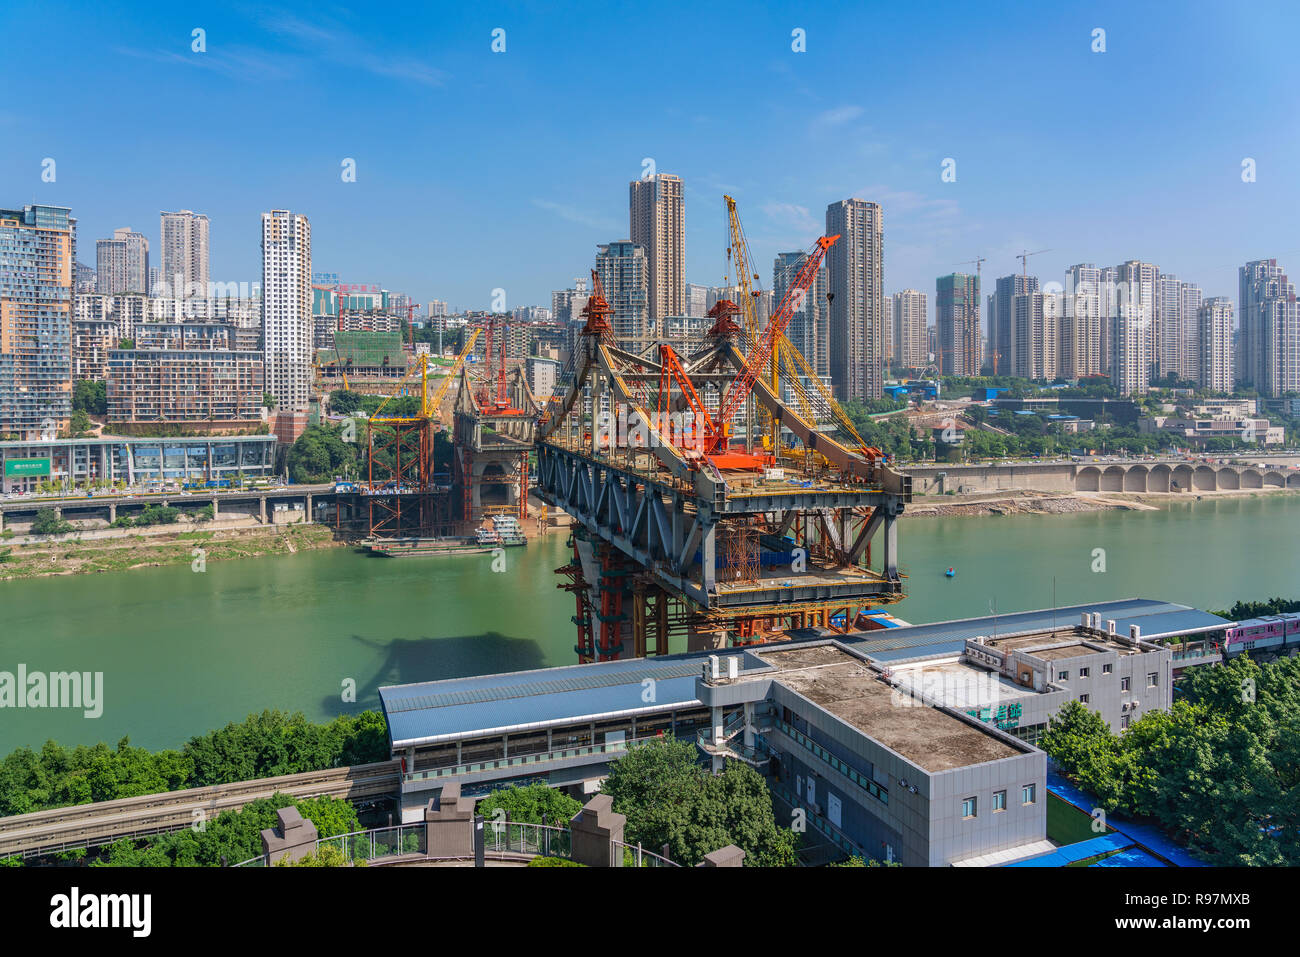 CHONGQING, CHINA - SEPTEMBER 19: View of riverside city buildings and a new bridge under construction along the Yangtze river in Chongqing on Septembe Stock Photo